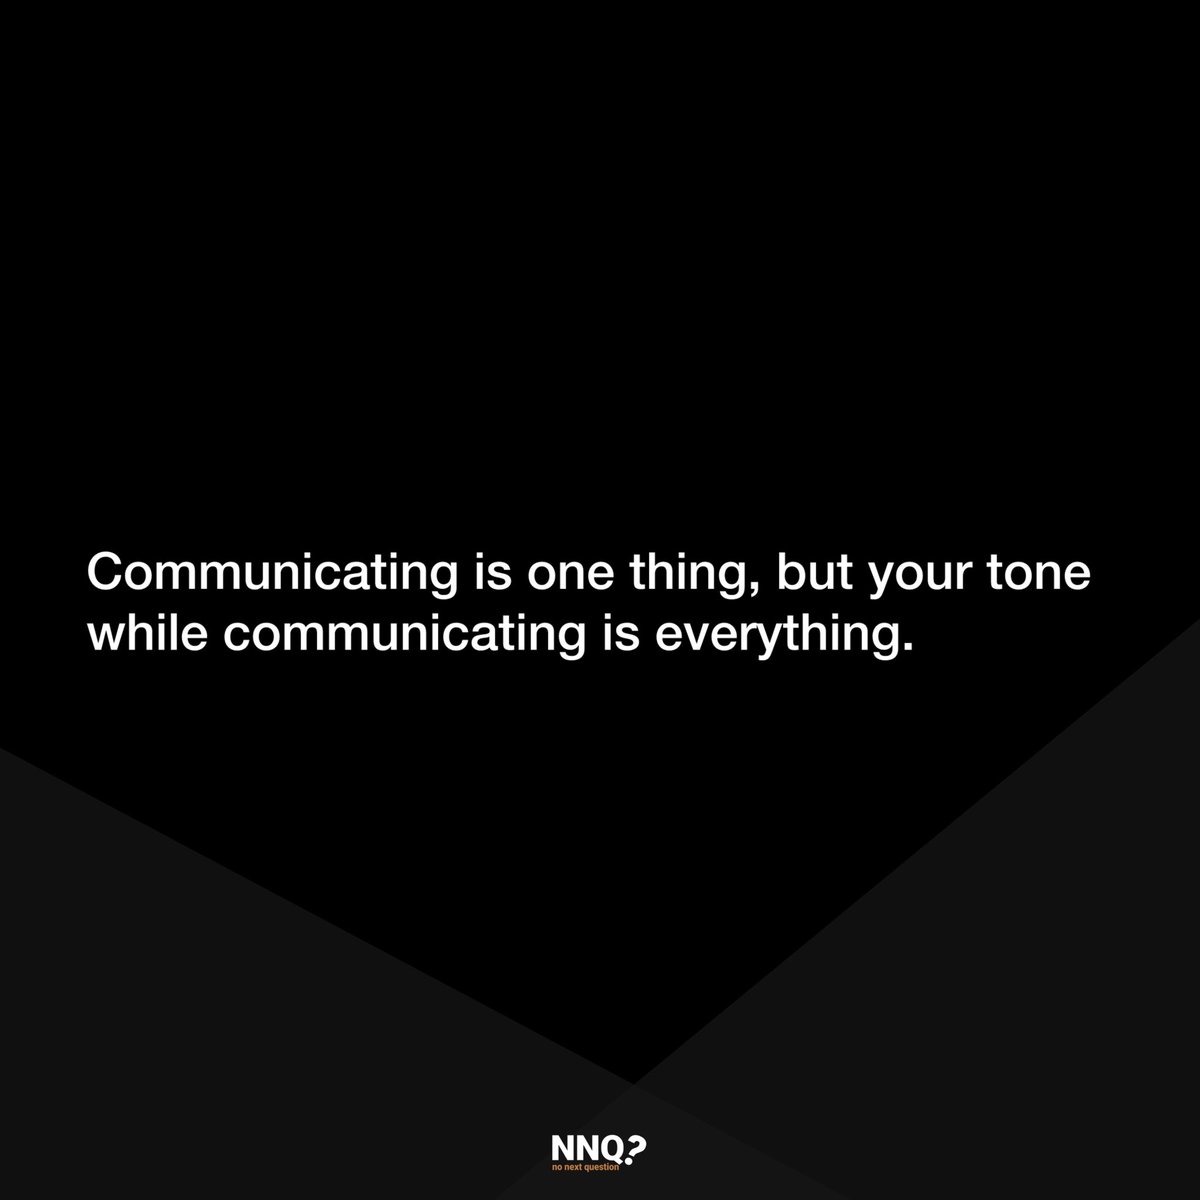 But your tone while communicating is everything.
#nonextquestion